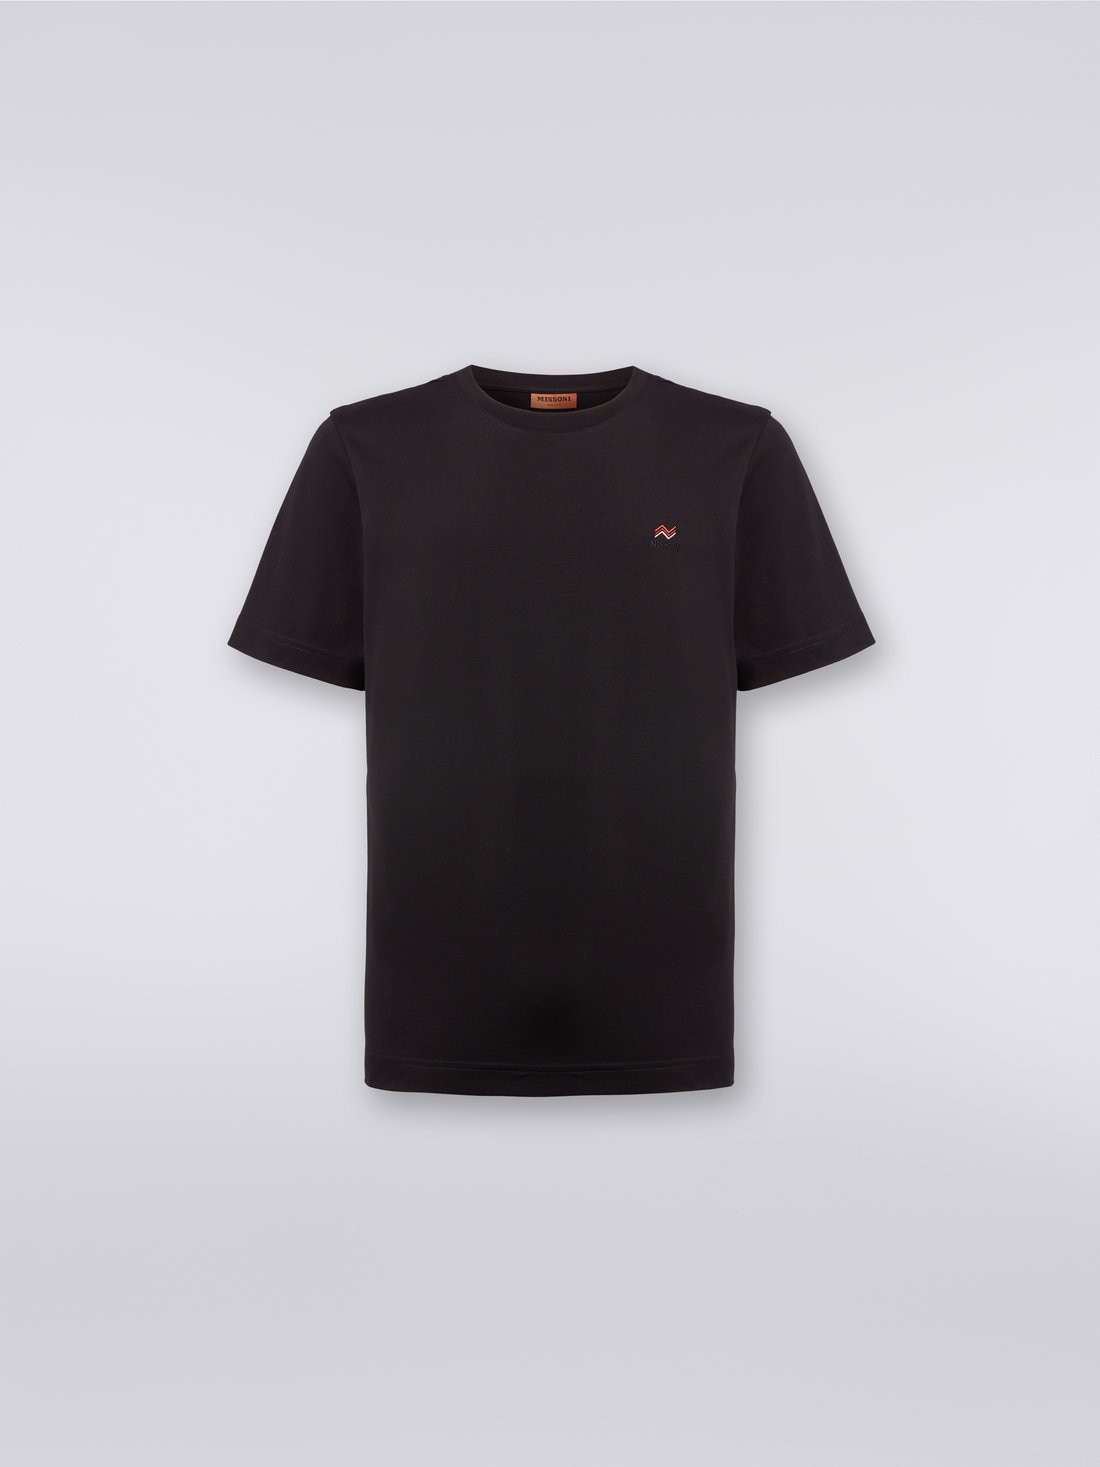 Crew-neck cotton T-shirt with embroidery and logo, Black    - 0